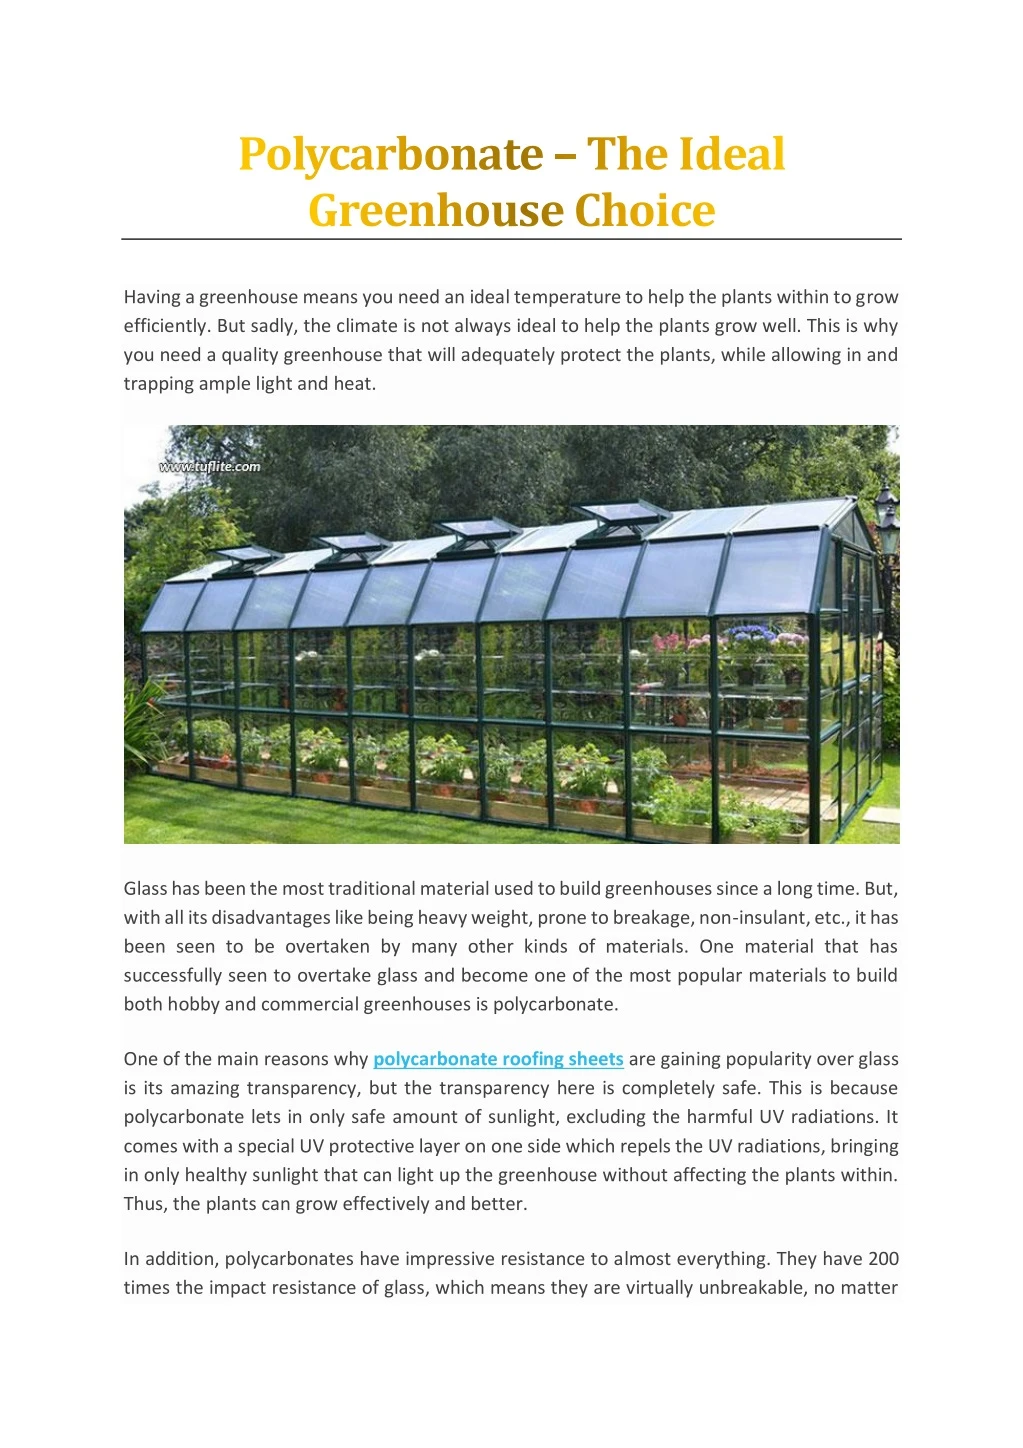 having a greenhouse means you need an ideal